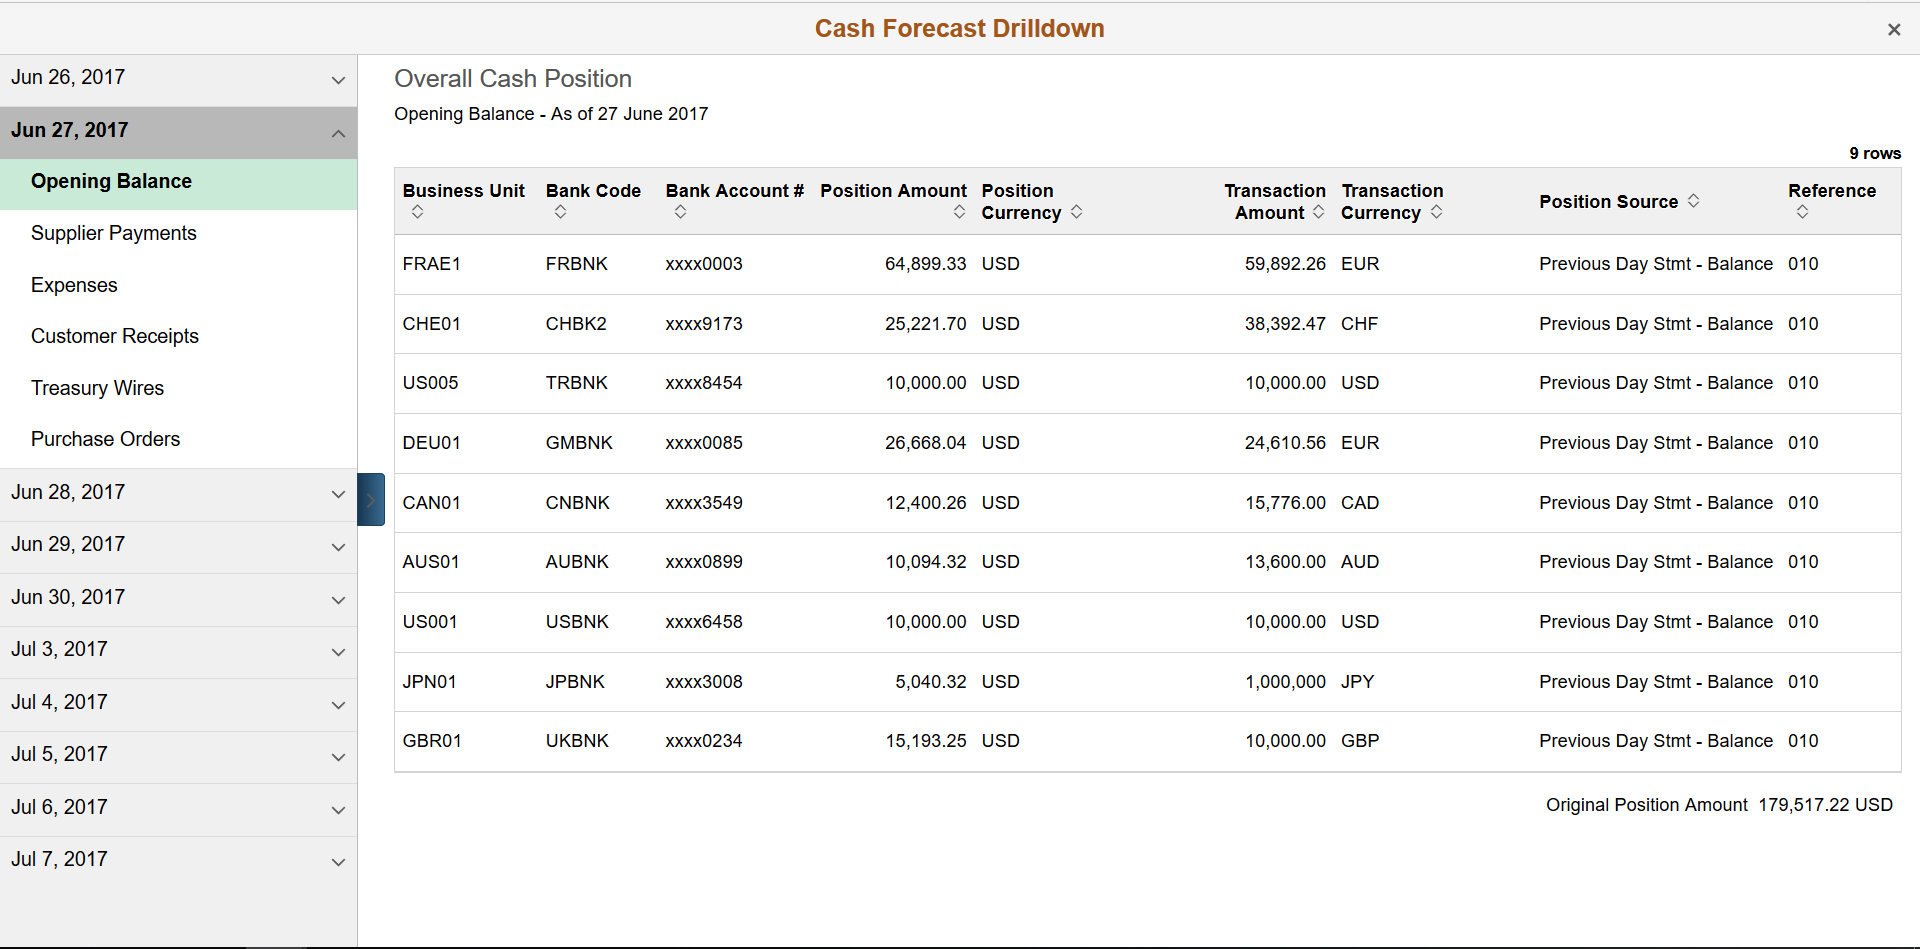 Fluid Cash Forecast Drilldown page